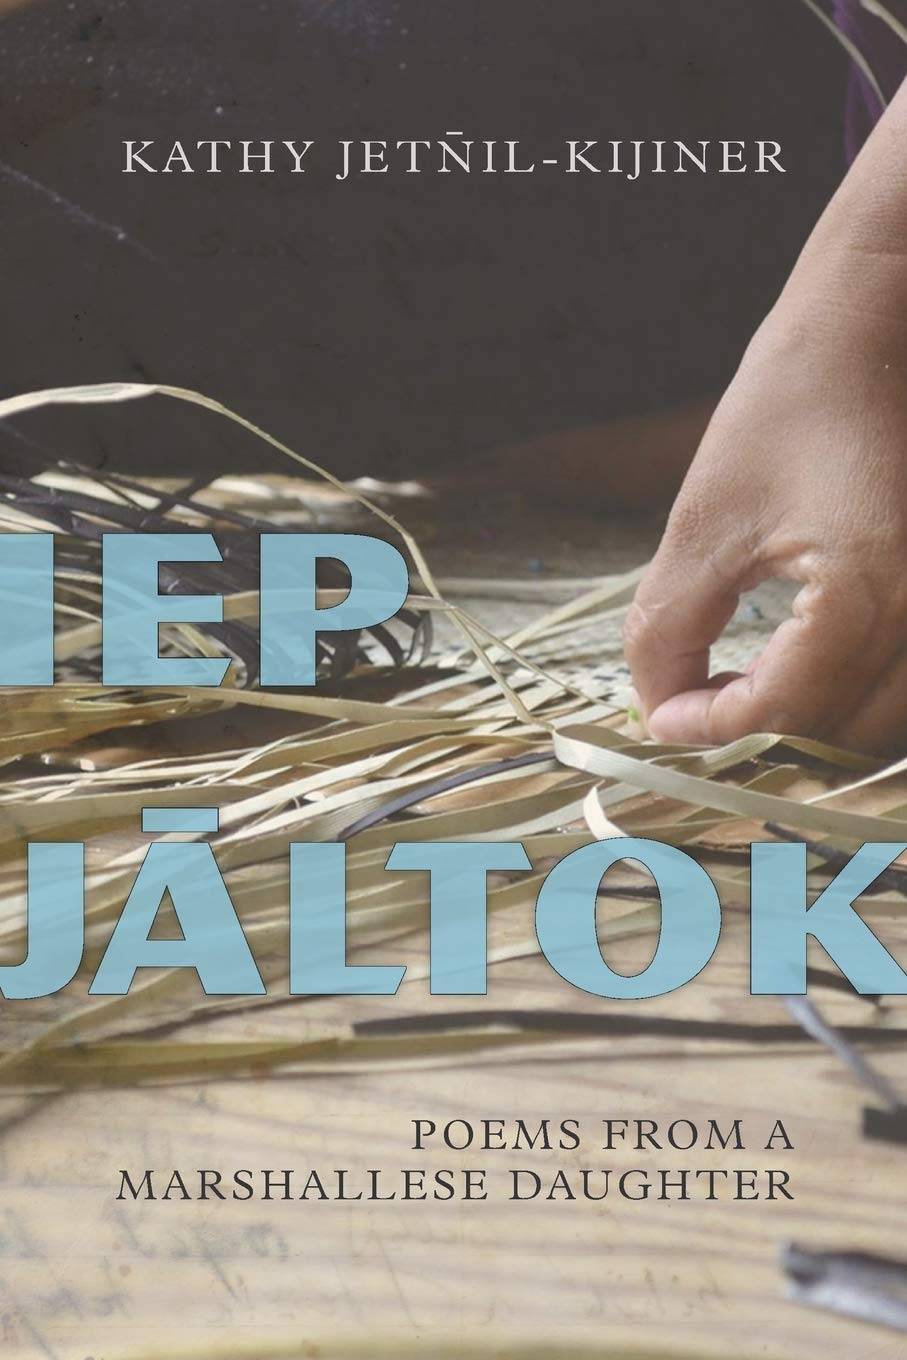 "Iep J&#257;ltok" book cover featuring a zoomed in photo of a hand weaving grass.